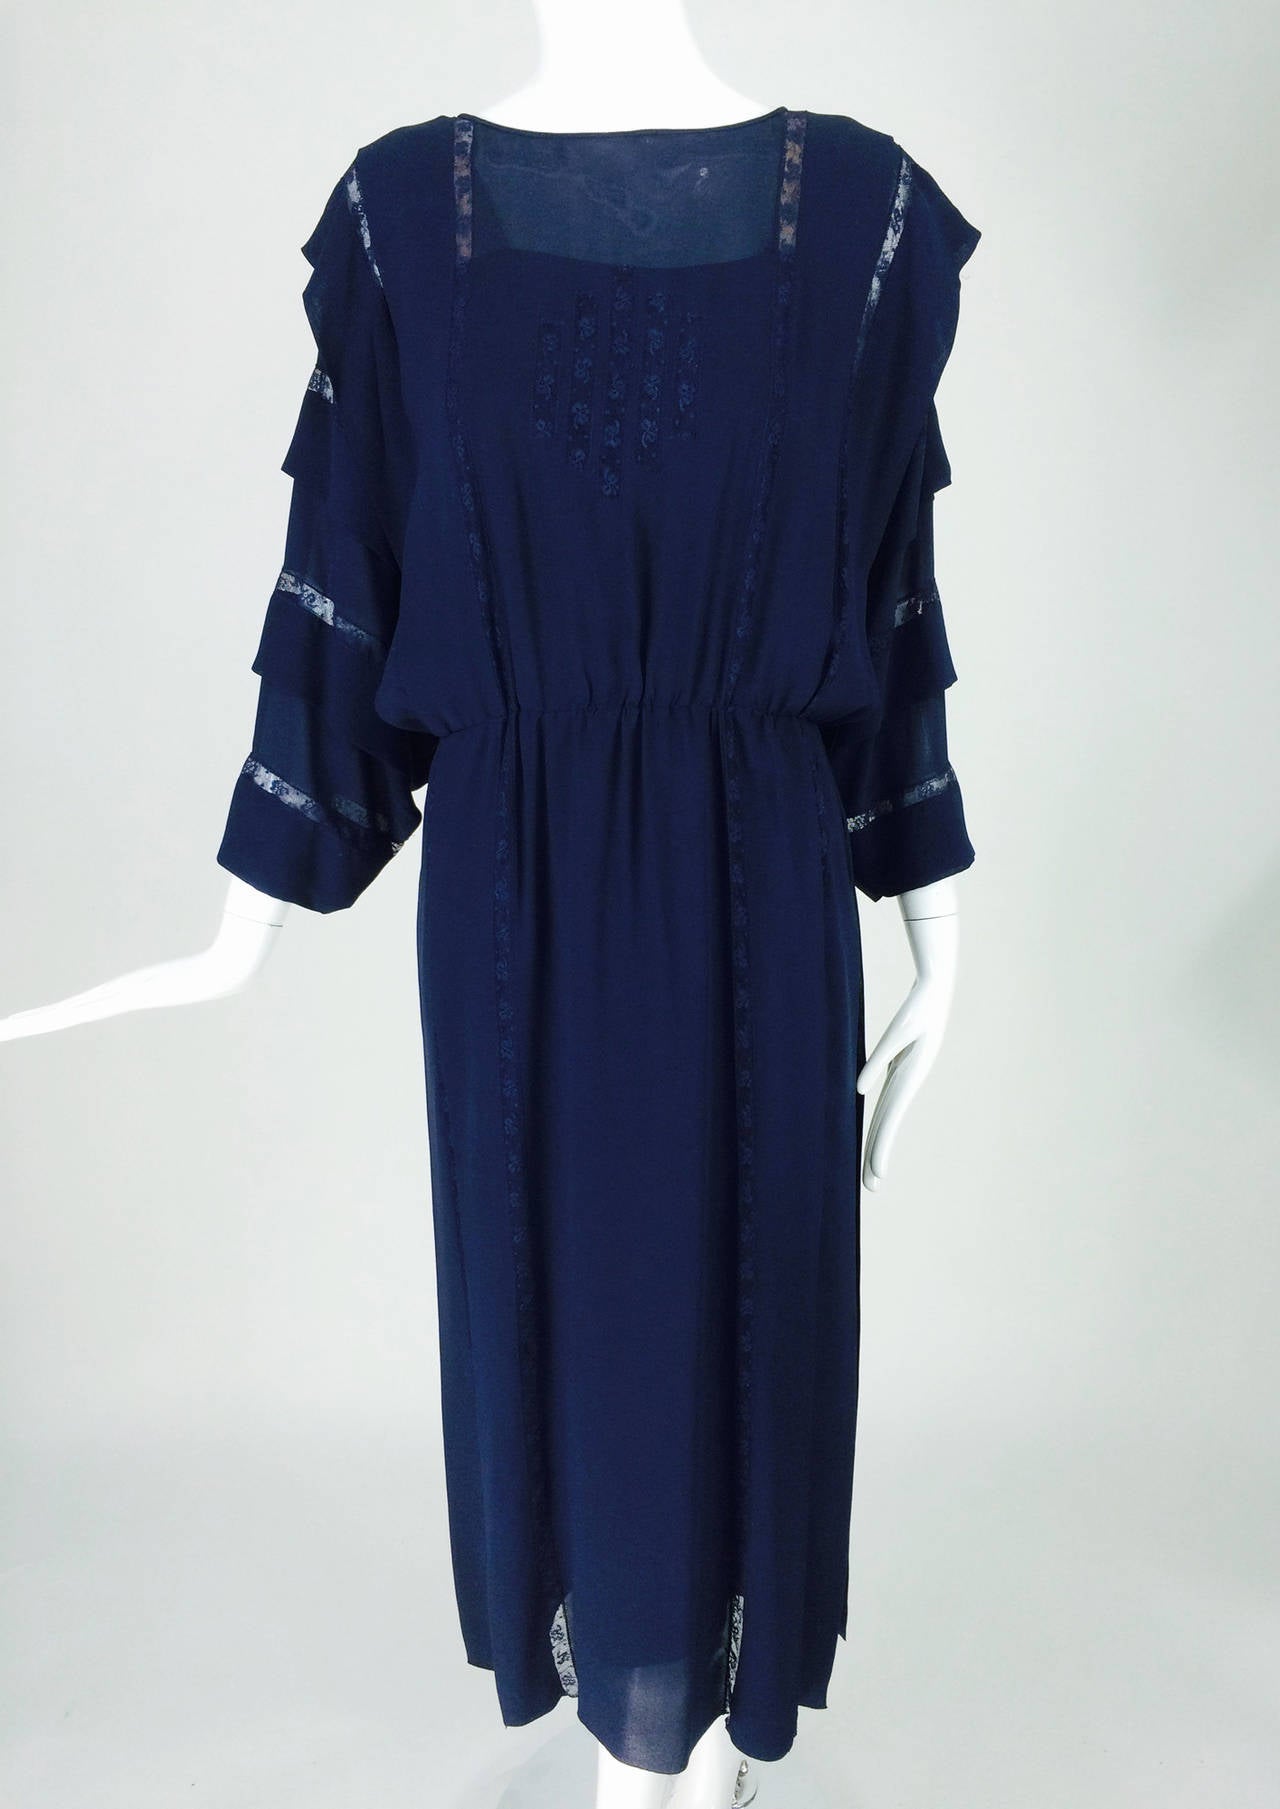 Chloe by Karl Lagerfeld blue chiffon lace insertion dress early 1980s In Excellent Condition In West Palm Beach, FL